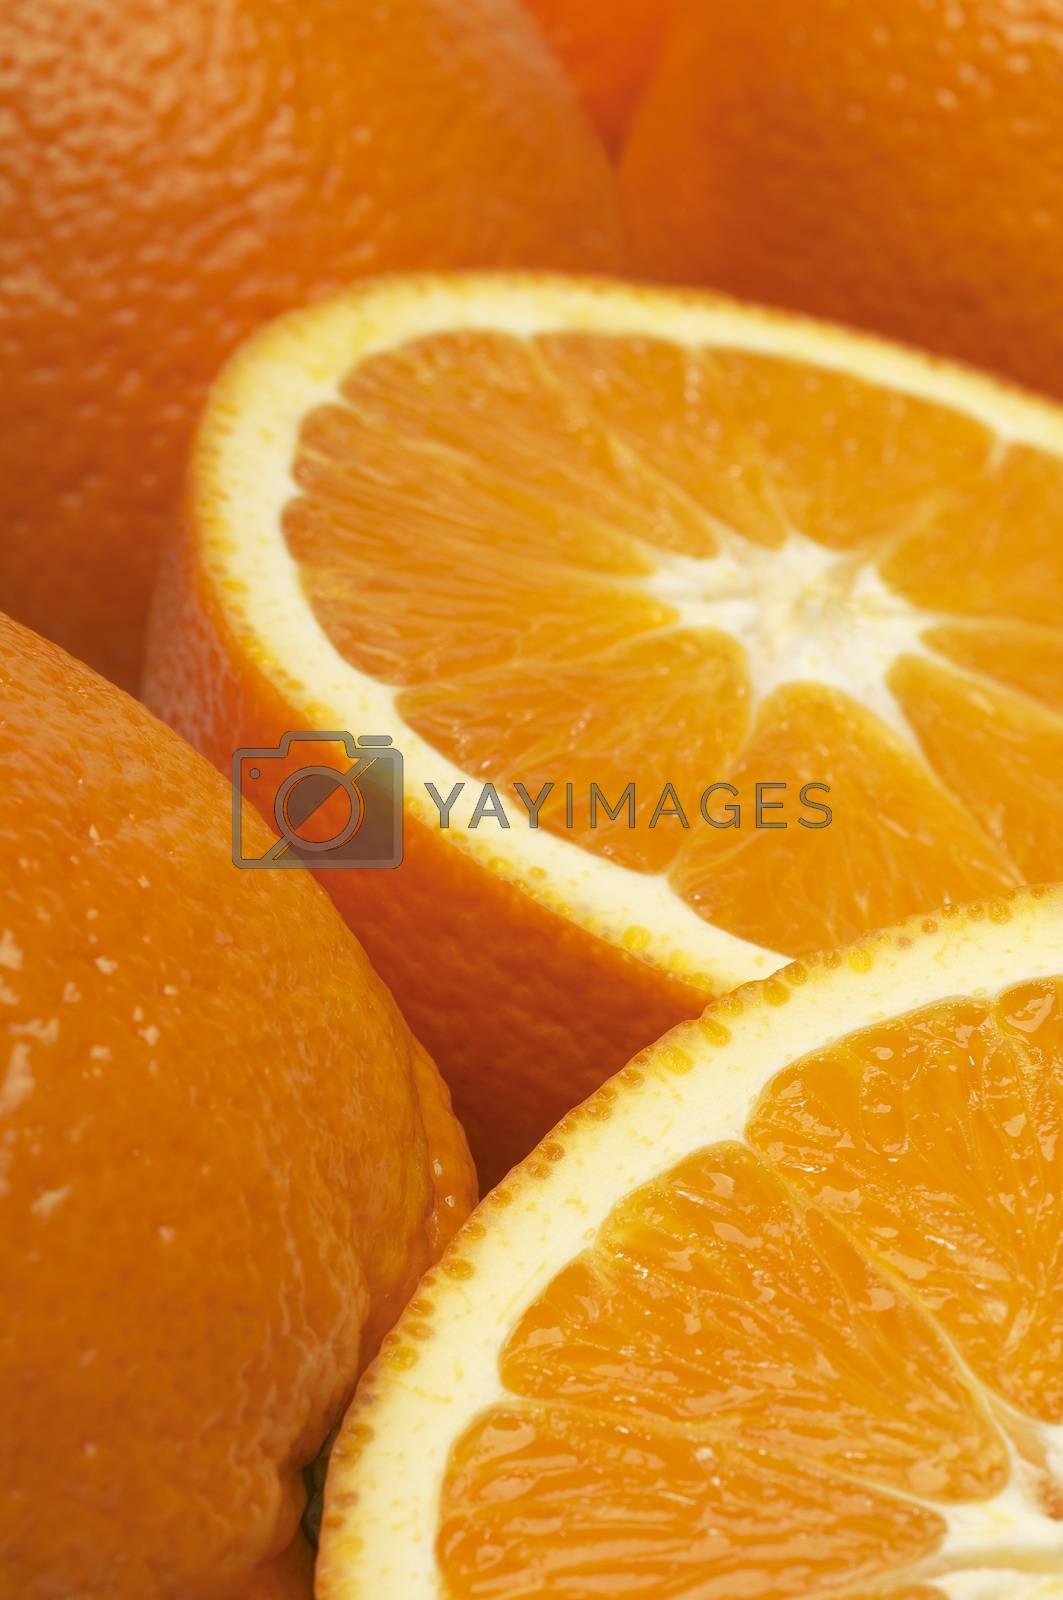 Royalty free image of Full frame image of fresh juicy oranges by moodboard